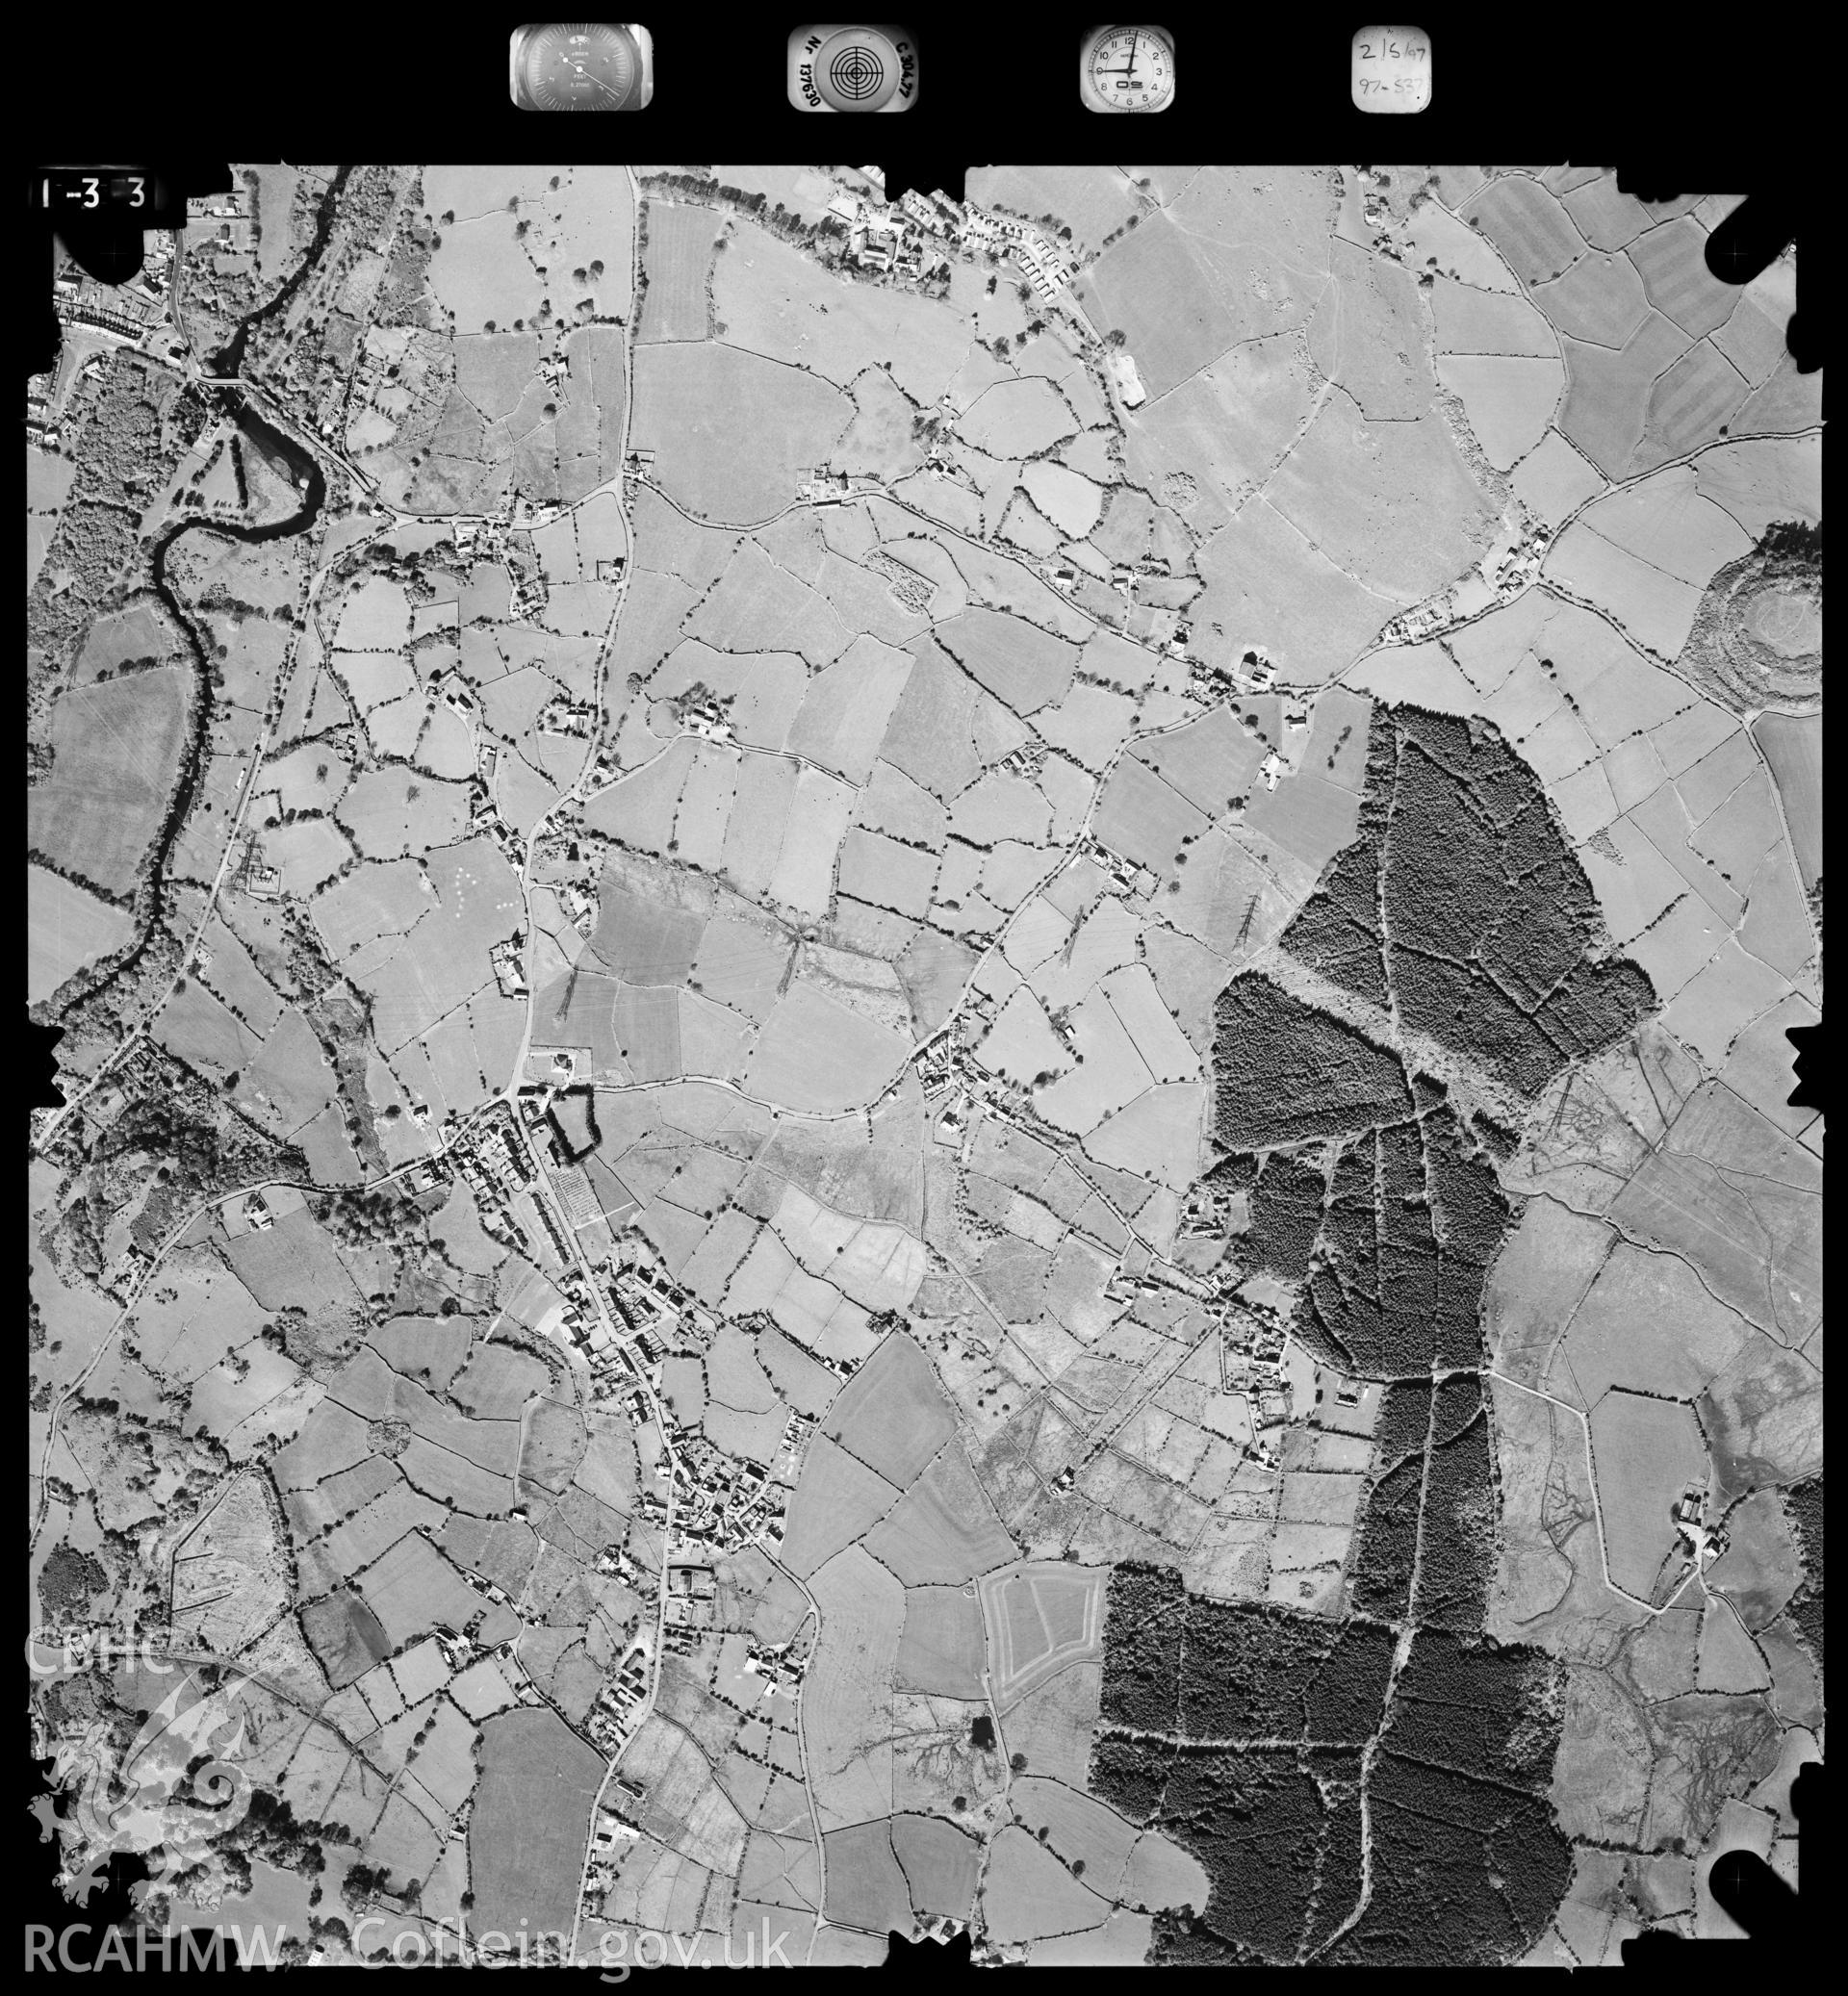 Digitized copy of an aerial photograph showing the Waun area, taken by Ordnance Survey, 1997.